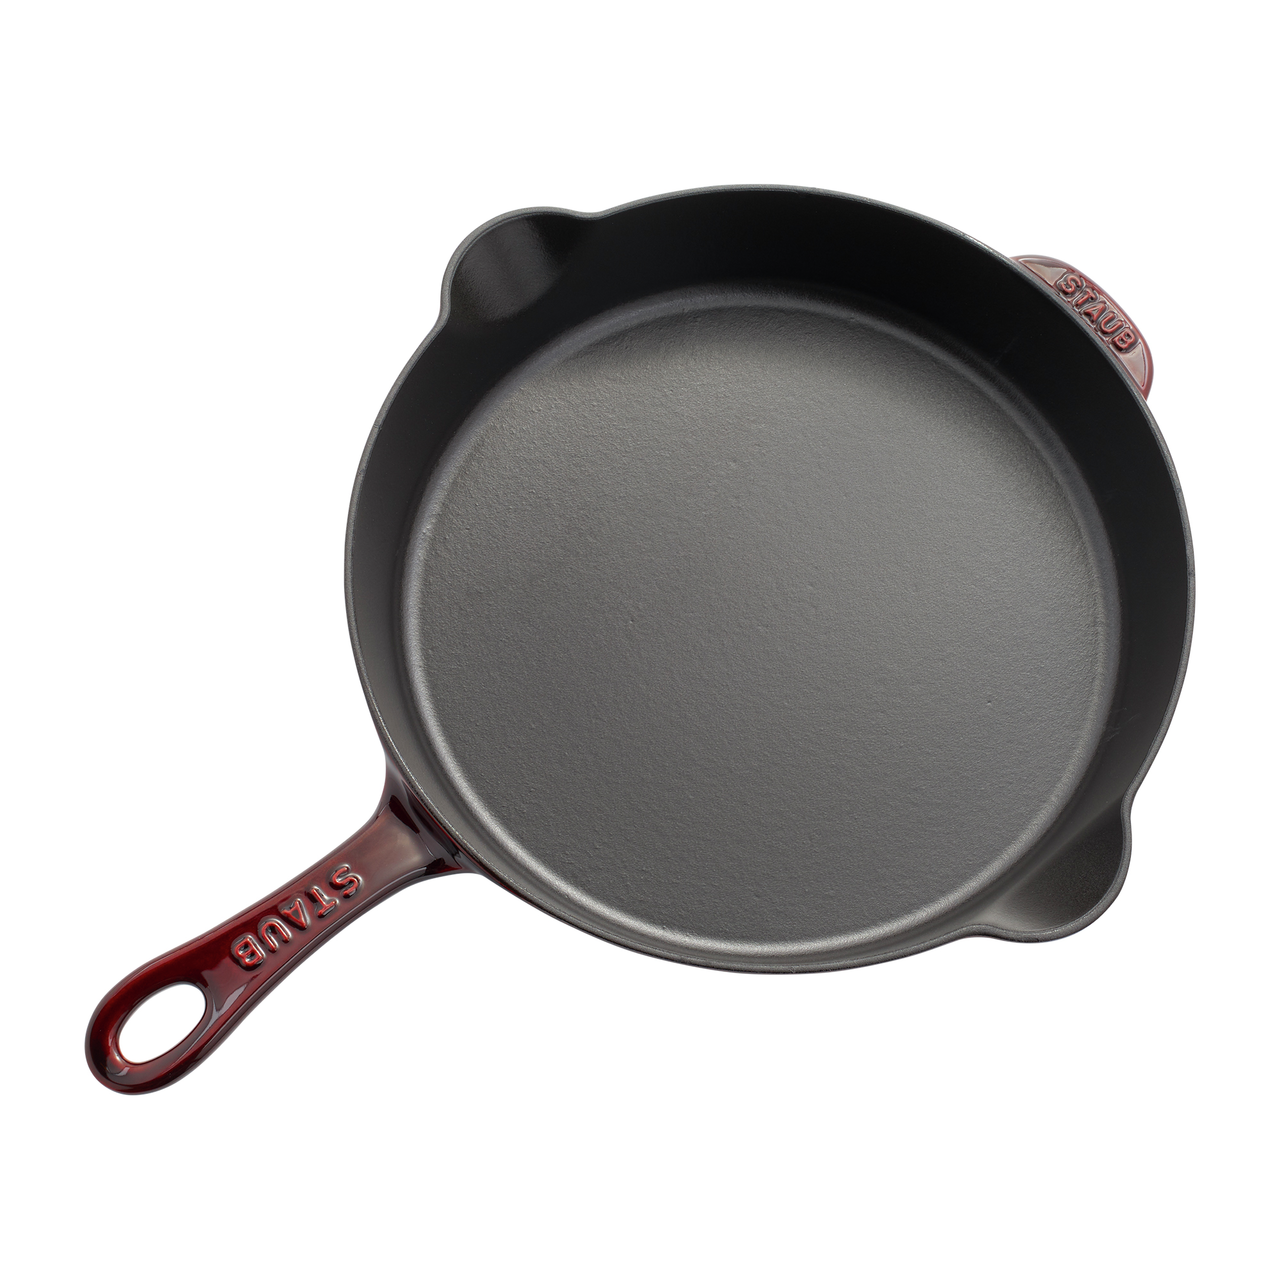 https://www.zwilling.com/on/demandware.static/-/Sites-zwilling-us-Library/default/dw42693932/images/product-content/product-specific-images/staub-pdp-hotspot-modules/staub-traditional-skillet-grenadine.png